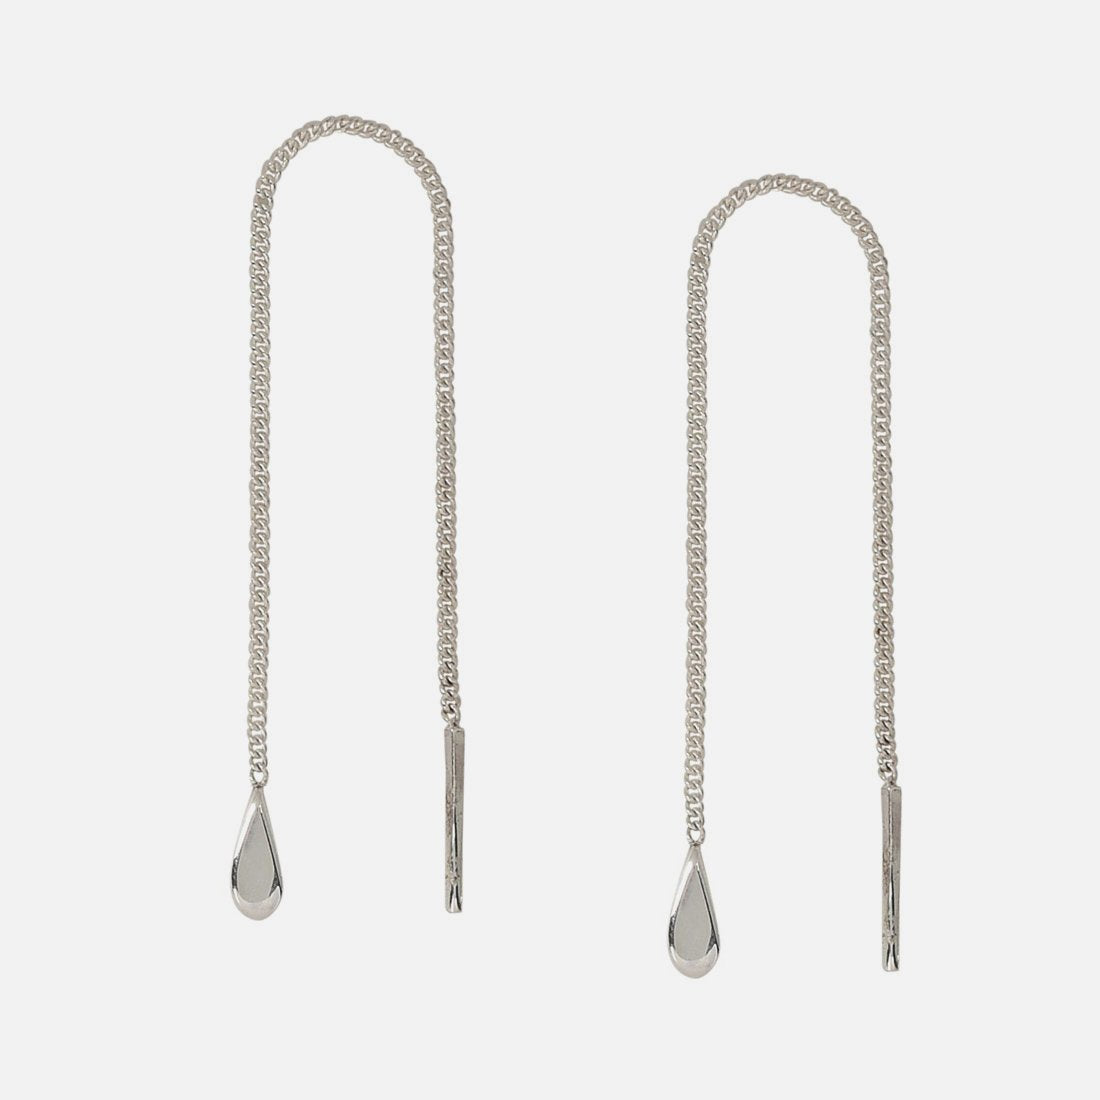 Constant Sterling Silver Earrings - Chain